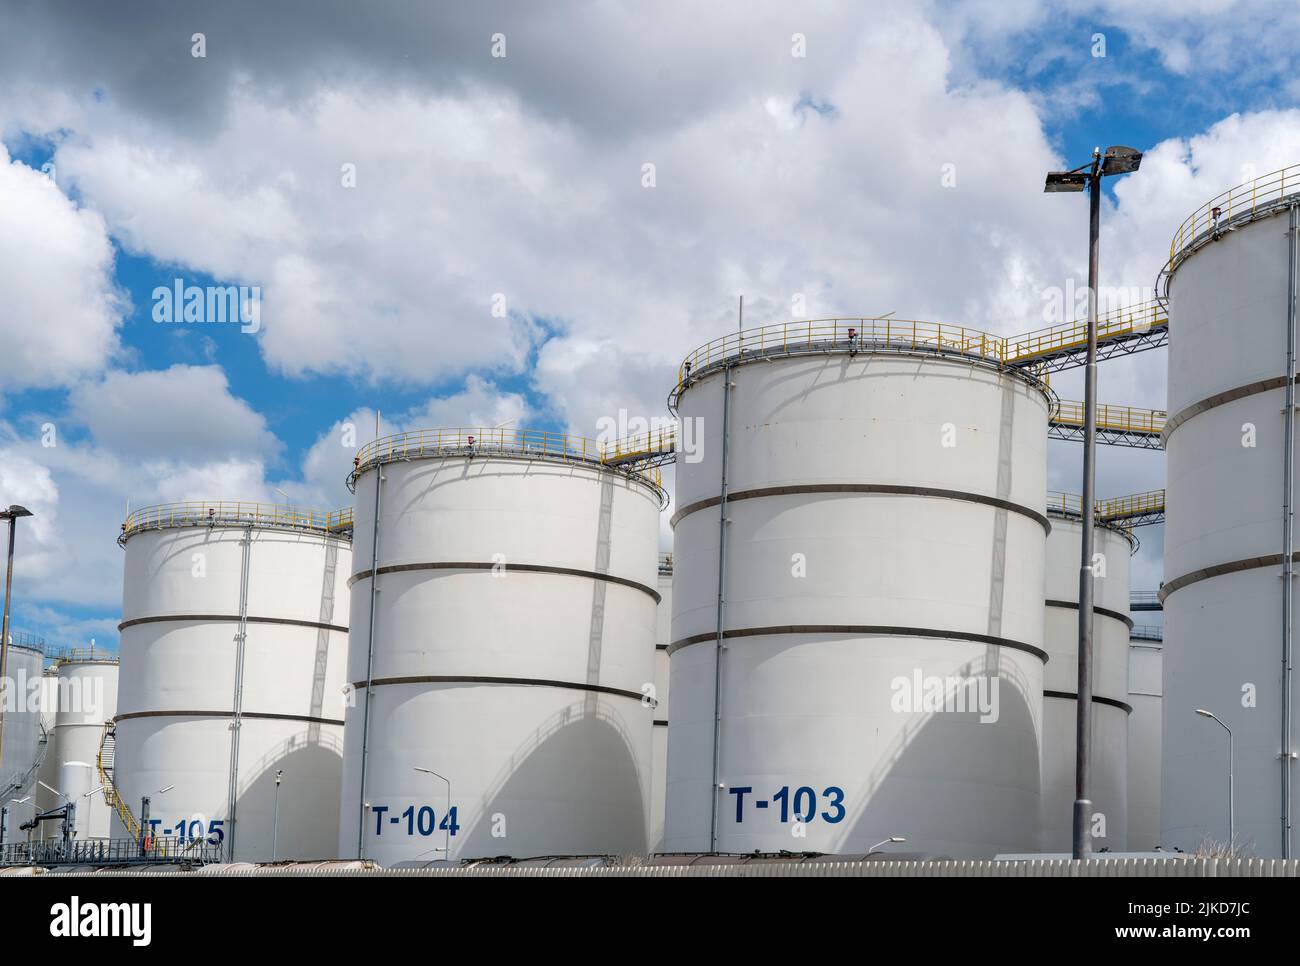 HES Botlek Tank Terminal, tank logistics for various petroleum products, such as petrol, paraffin, diesel, biodiesel, Rotterdam, Netherlands, Stock Photo